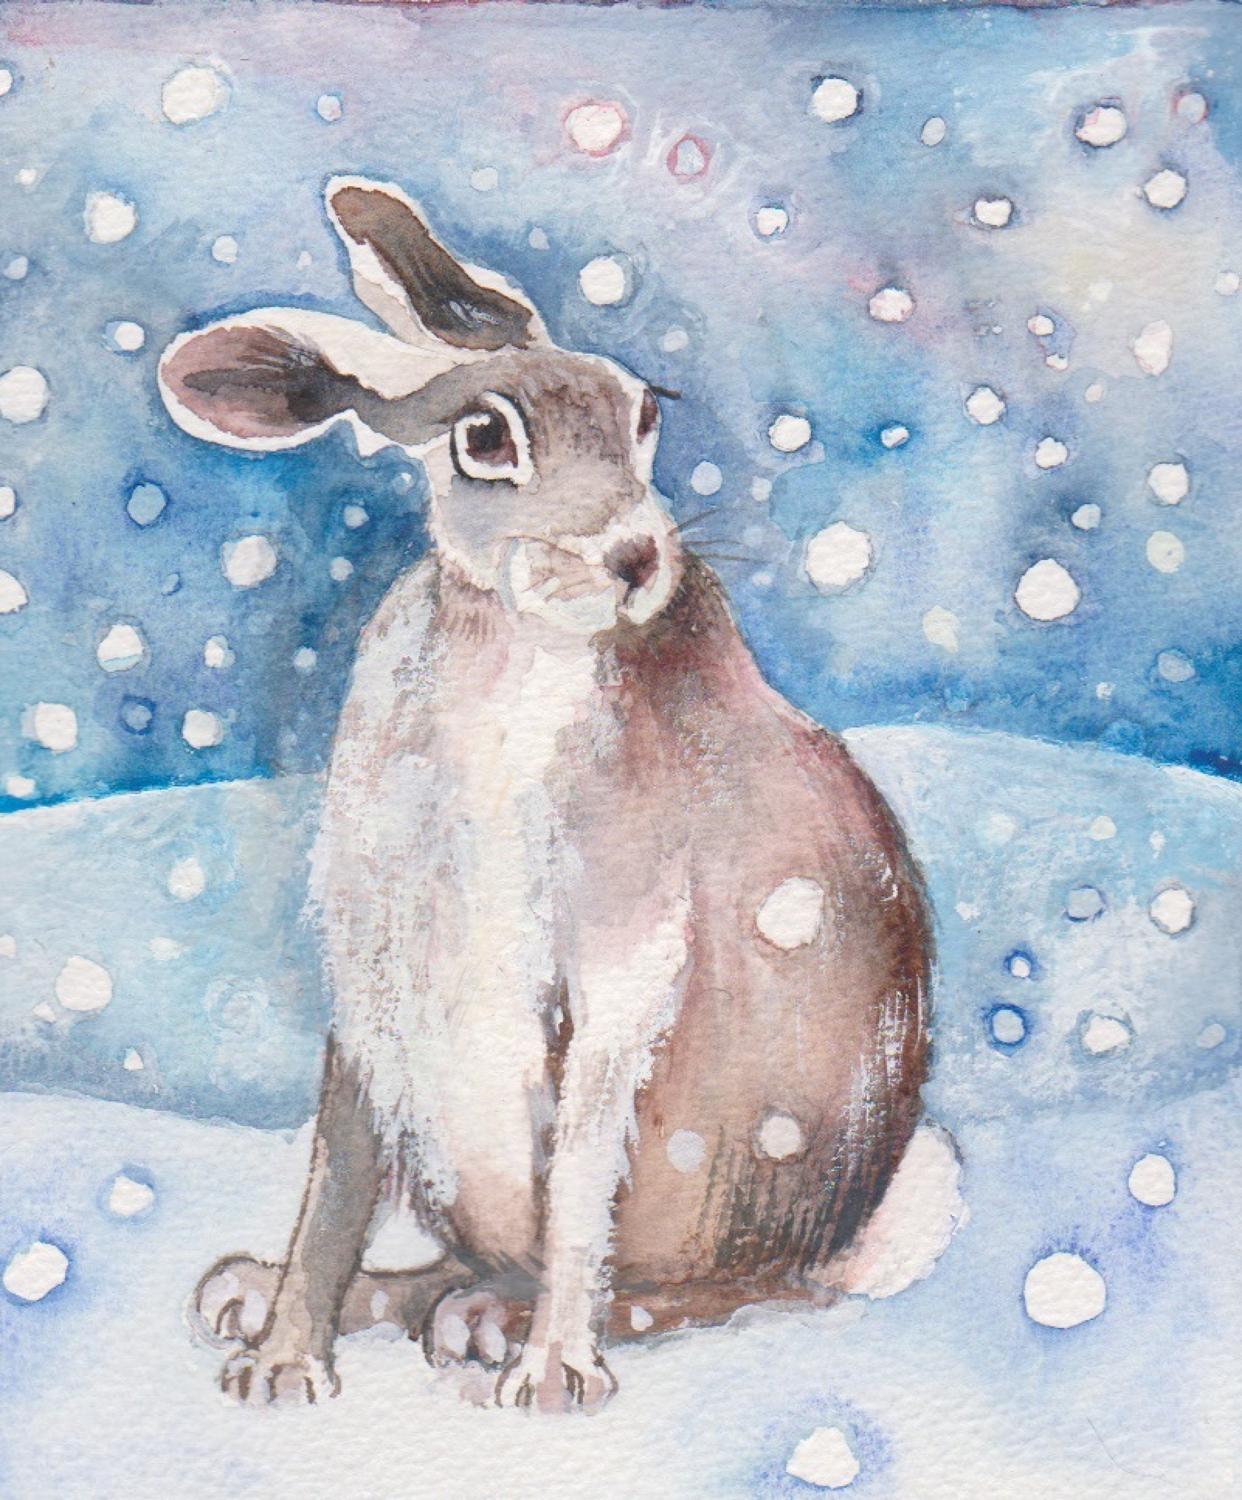 Hare in the snow